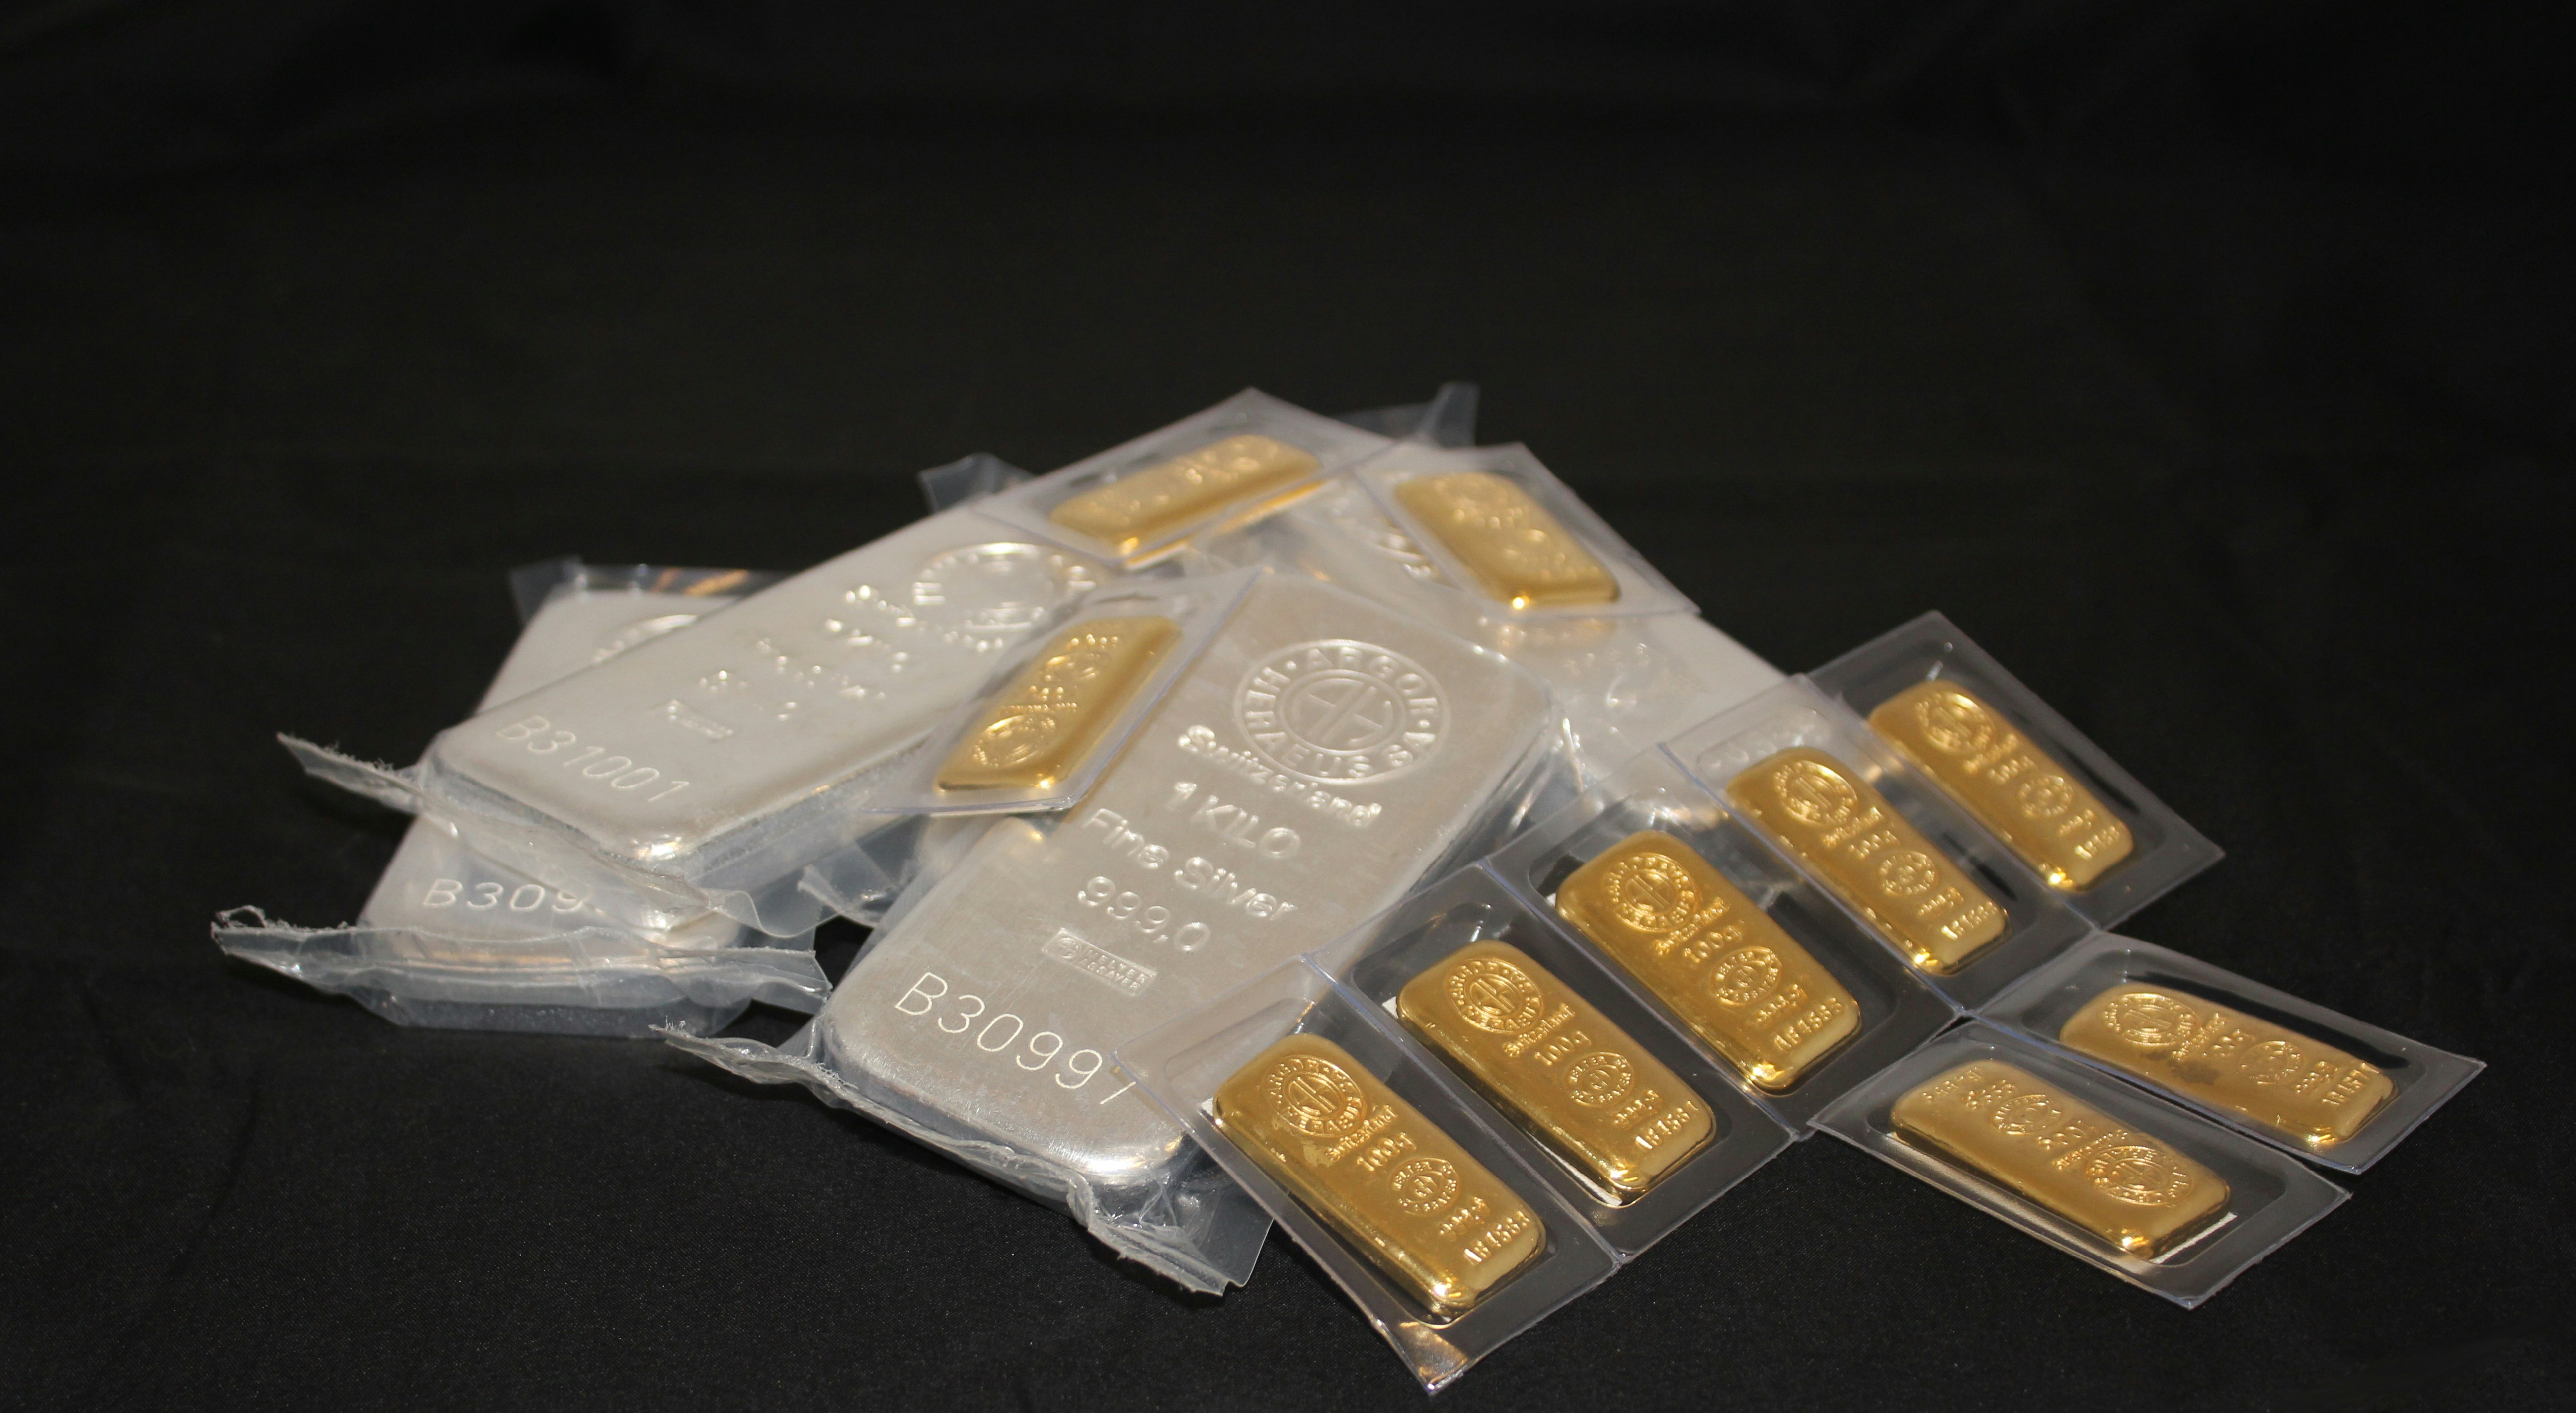 Pile of gold and silver bullion bars Argor Heraeus. If you use our photos, please add credit to https://zlataky.cz, when possible